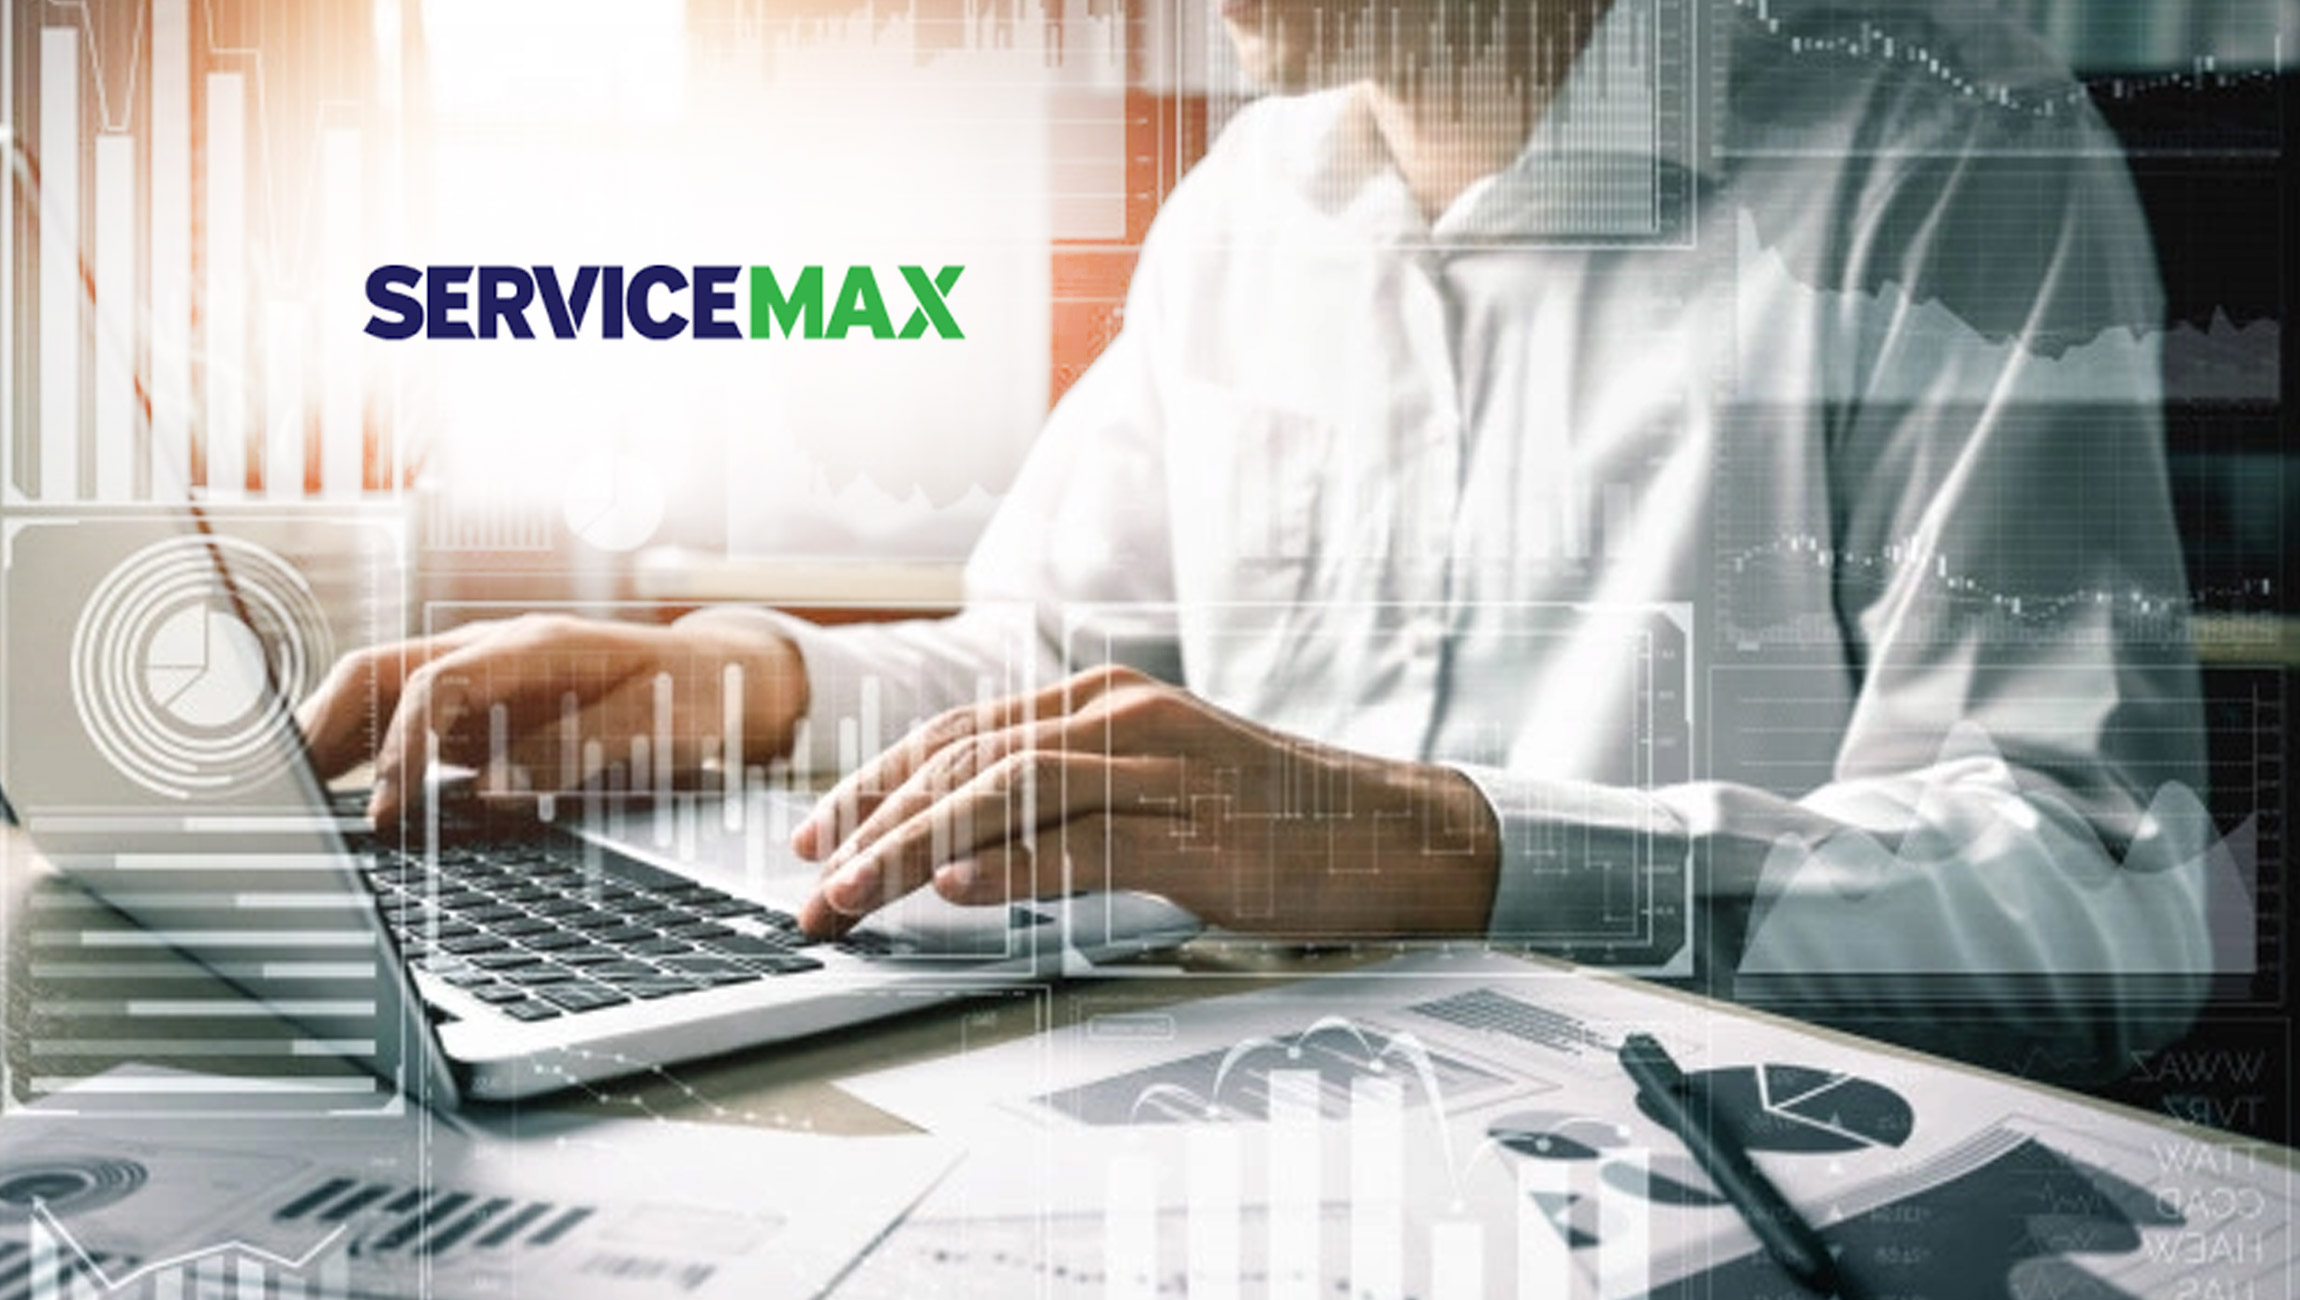 ServiceMax Launches DataGuide to Provide Integrated Data Capture and Report Generation Capabilities to Technicians in the Field